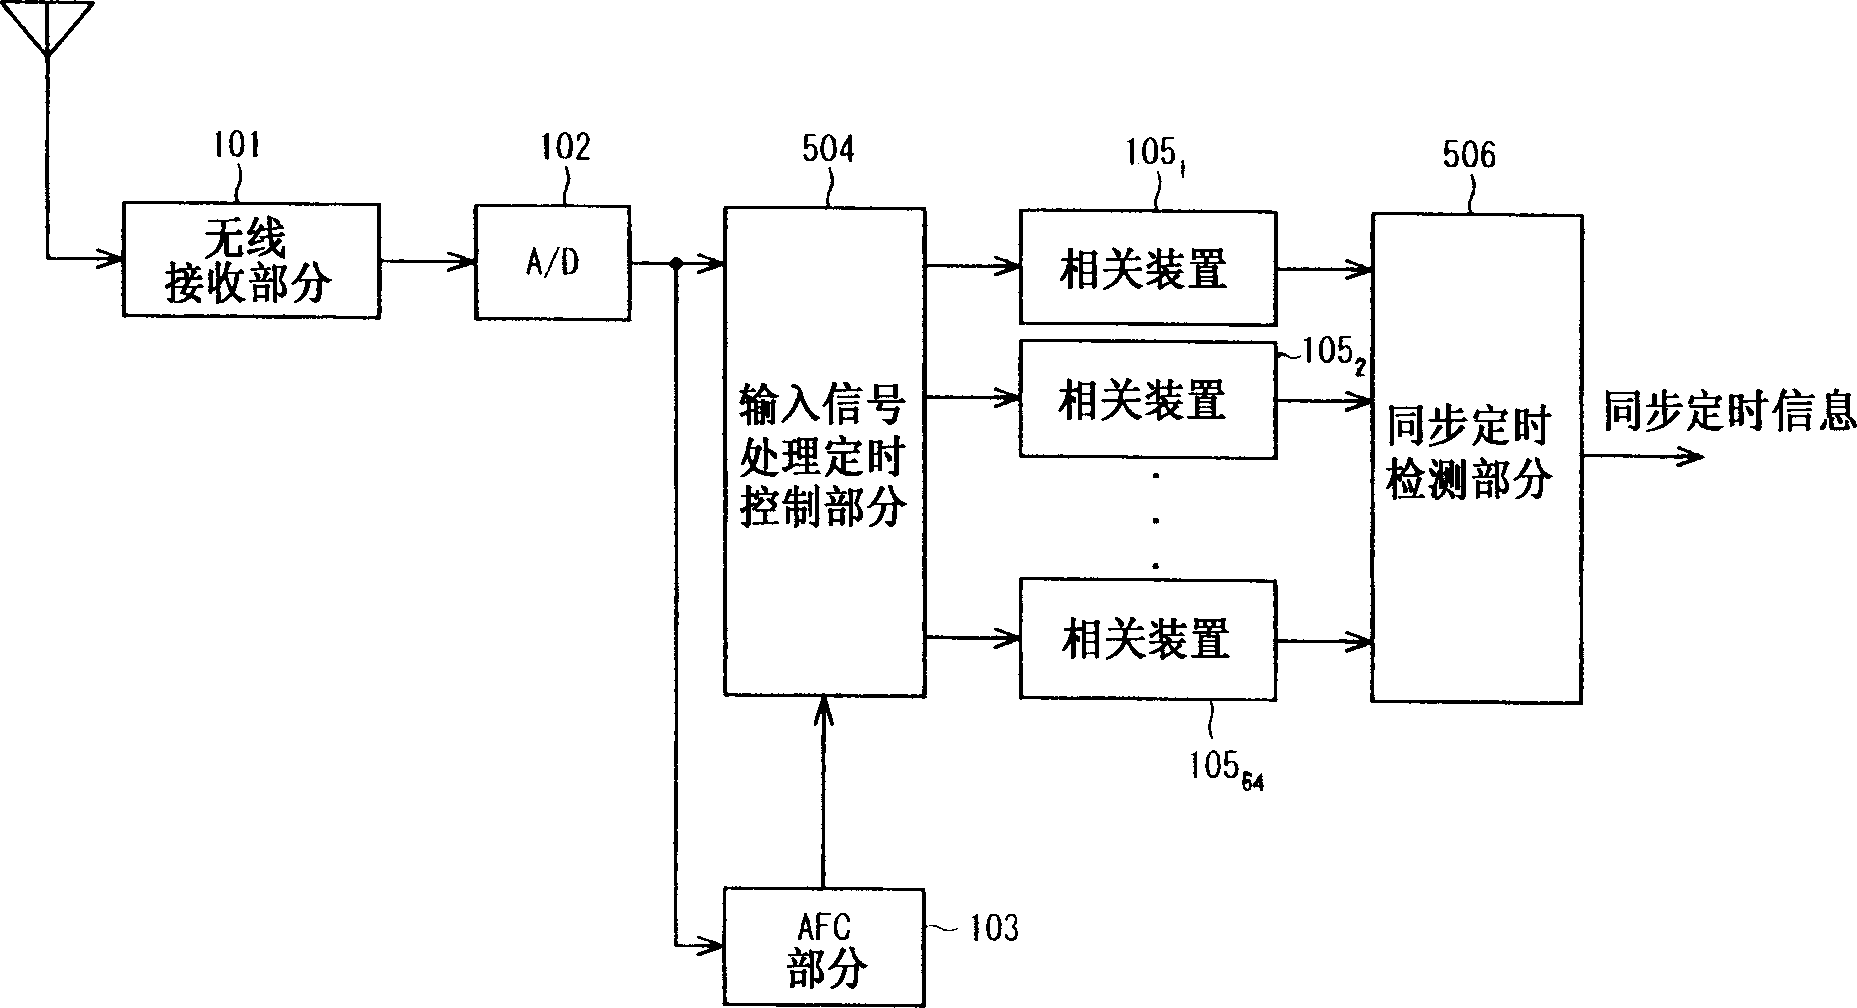 Synchronous timing calibrating circuit and method